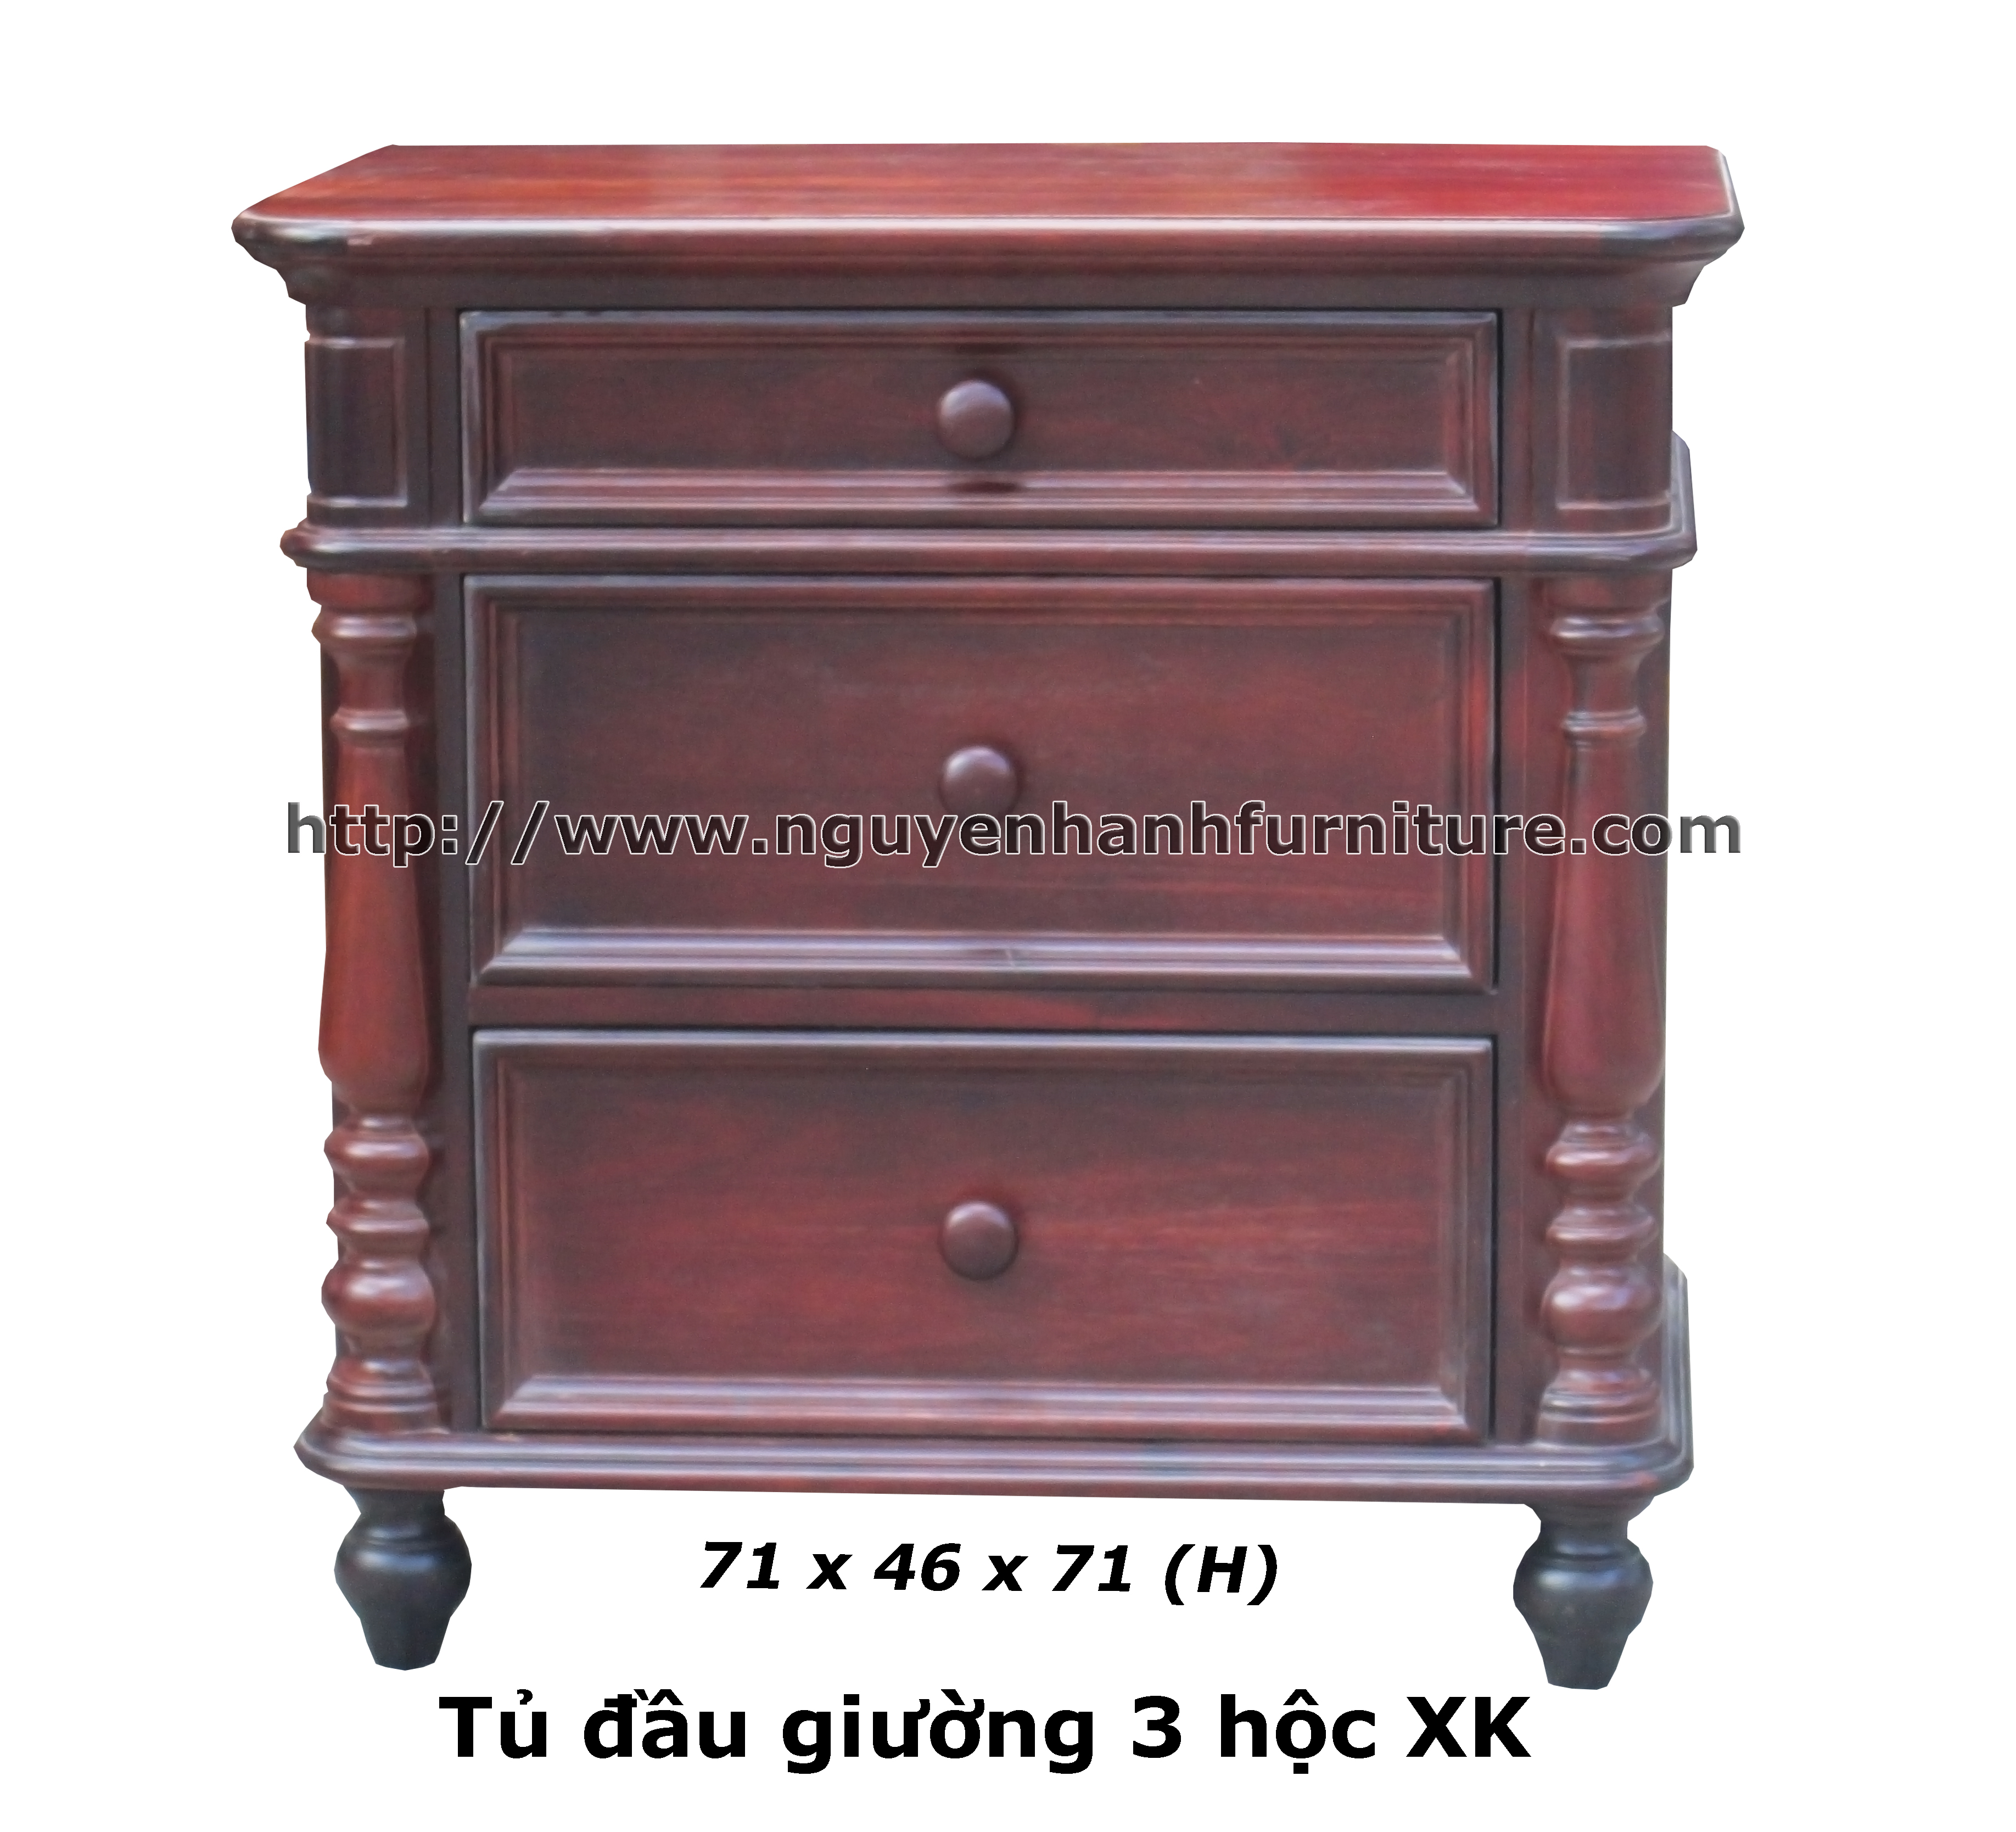 Name product: Headboard cabinet XK (3 drawers) - Dimensions: 71 x 46 x 71 (H) - Description: 